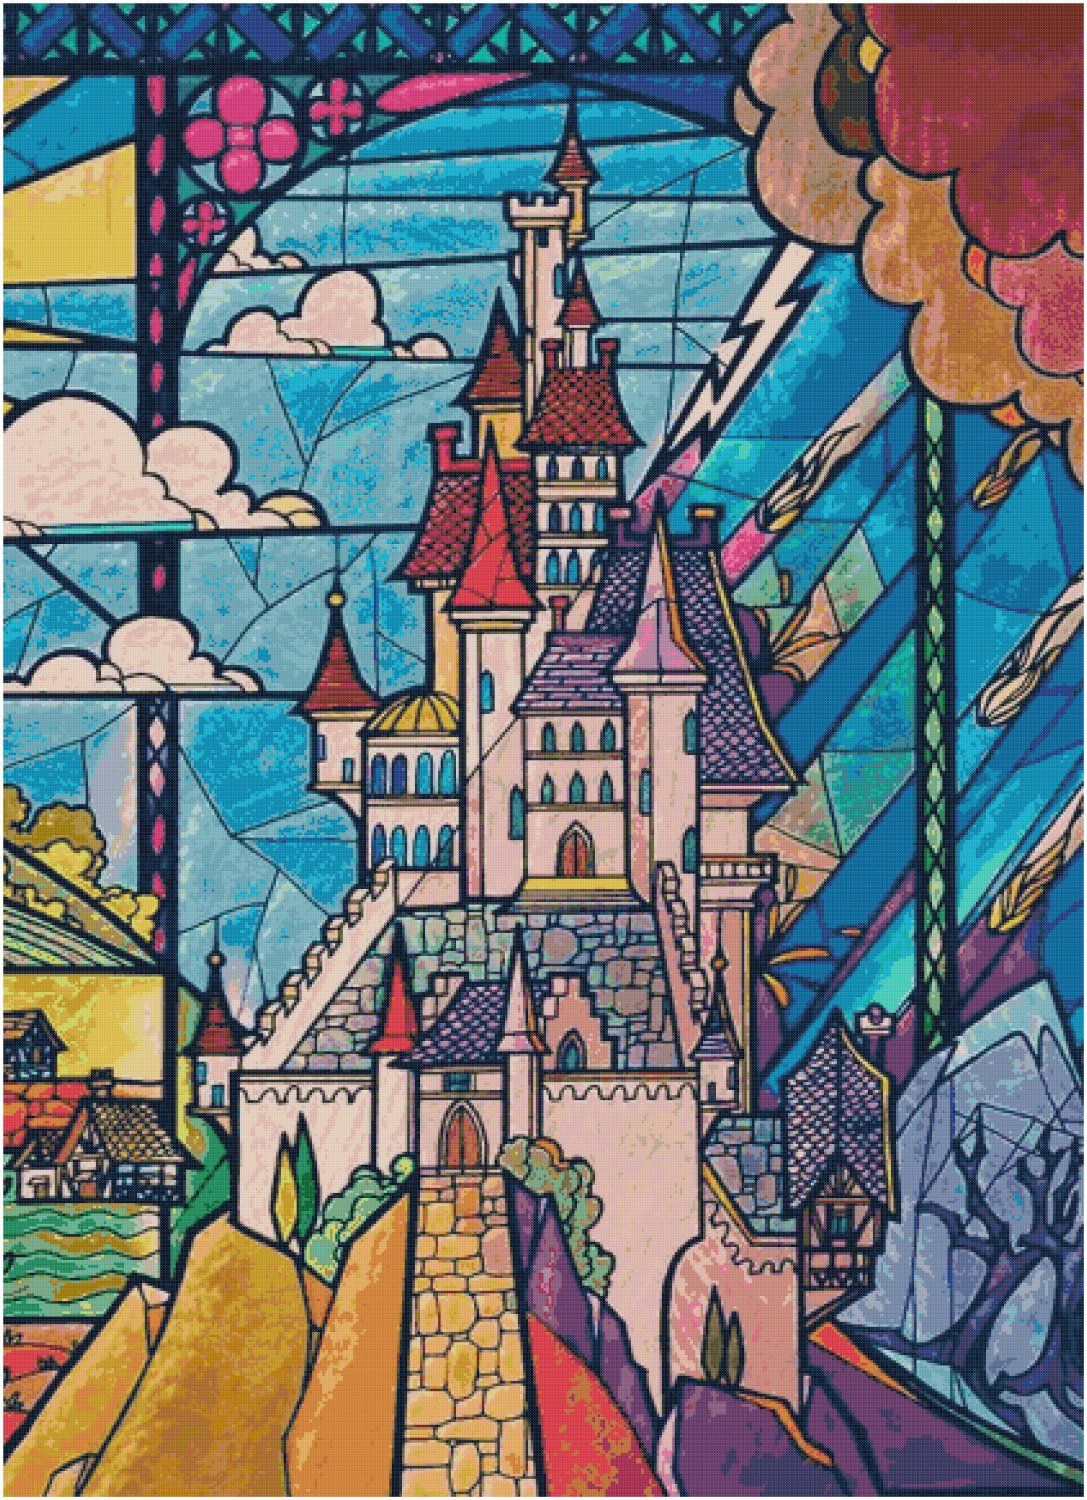 DISNEY BEAUTY AND THE BEAST STAINED GLASS CASTLE CROSS STITCH PATTERN PDF ONLY. Disney stained glass, Beast's castle, Disney wallpaper